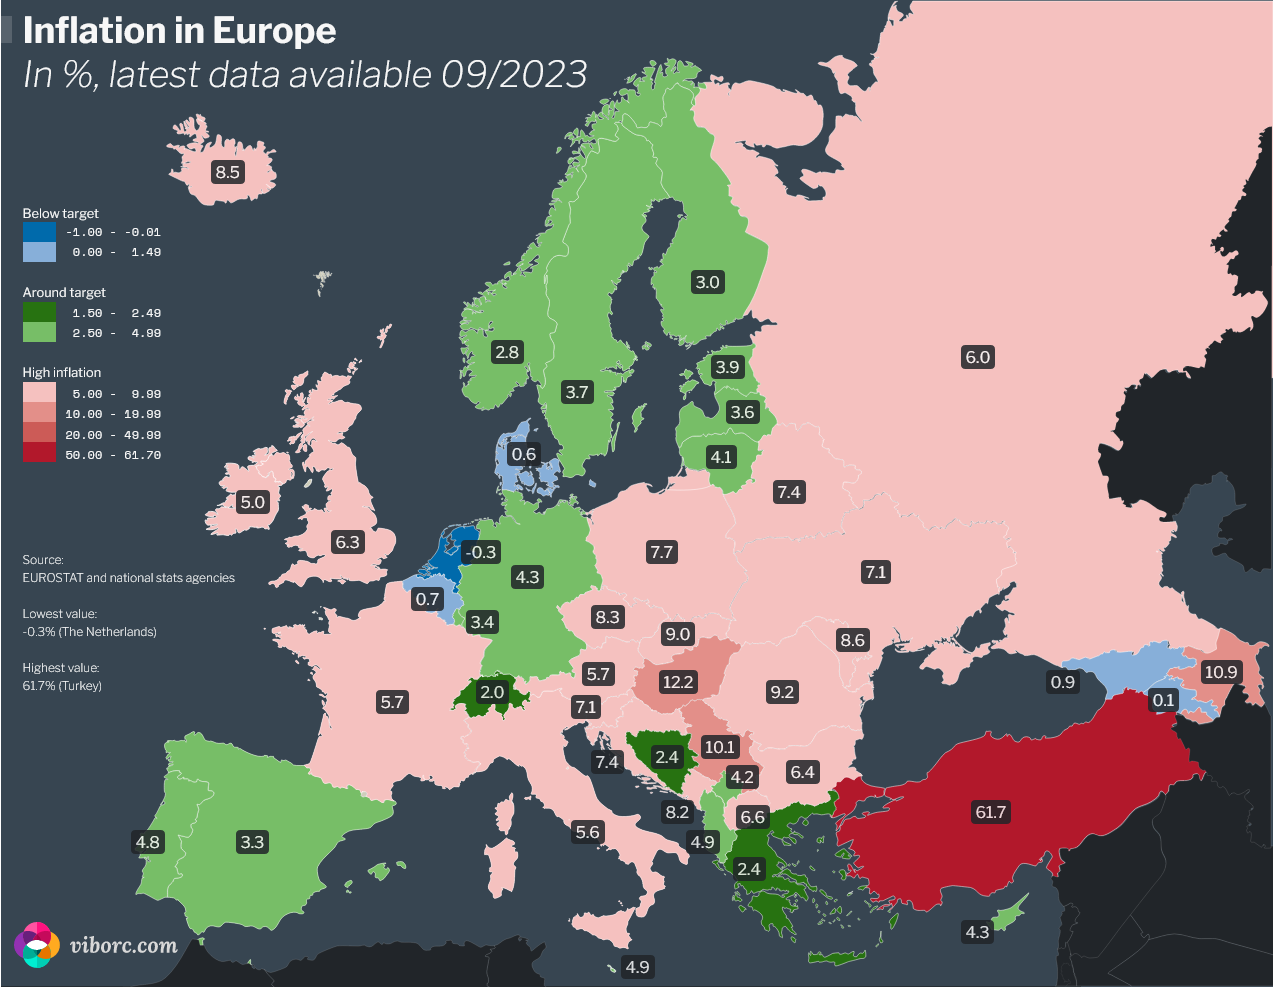 Map of Europe illustrating inflation rates in September 2023, with countries color-coded based on their respective percentages. Turkey has the highest rate, and the Netherlands reports a slight deflation.